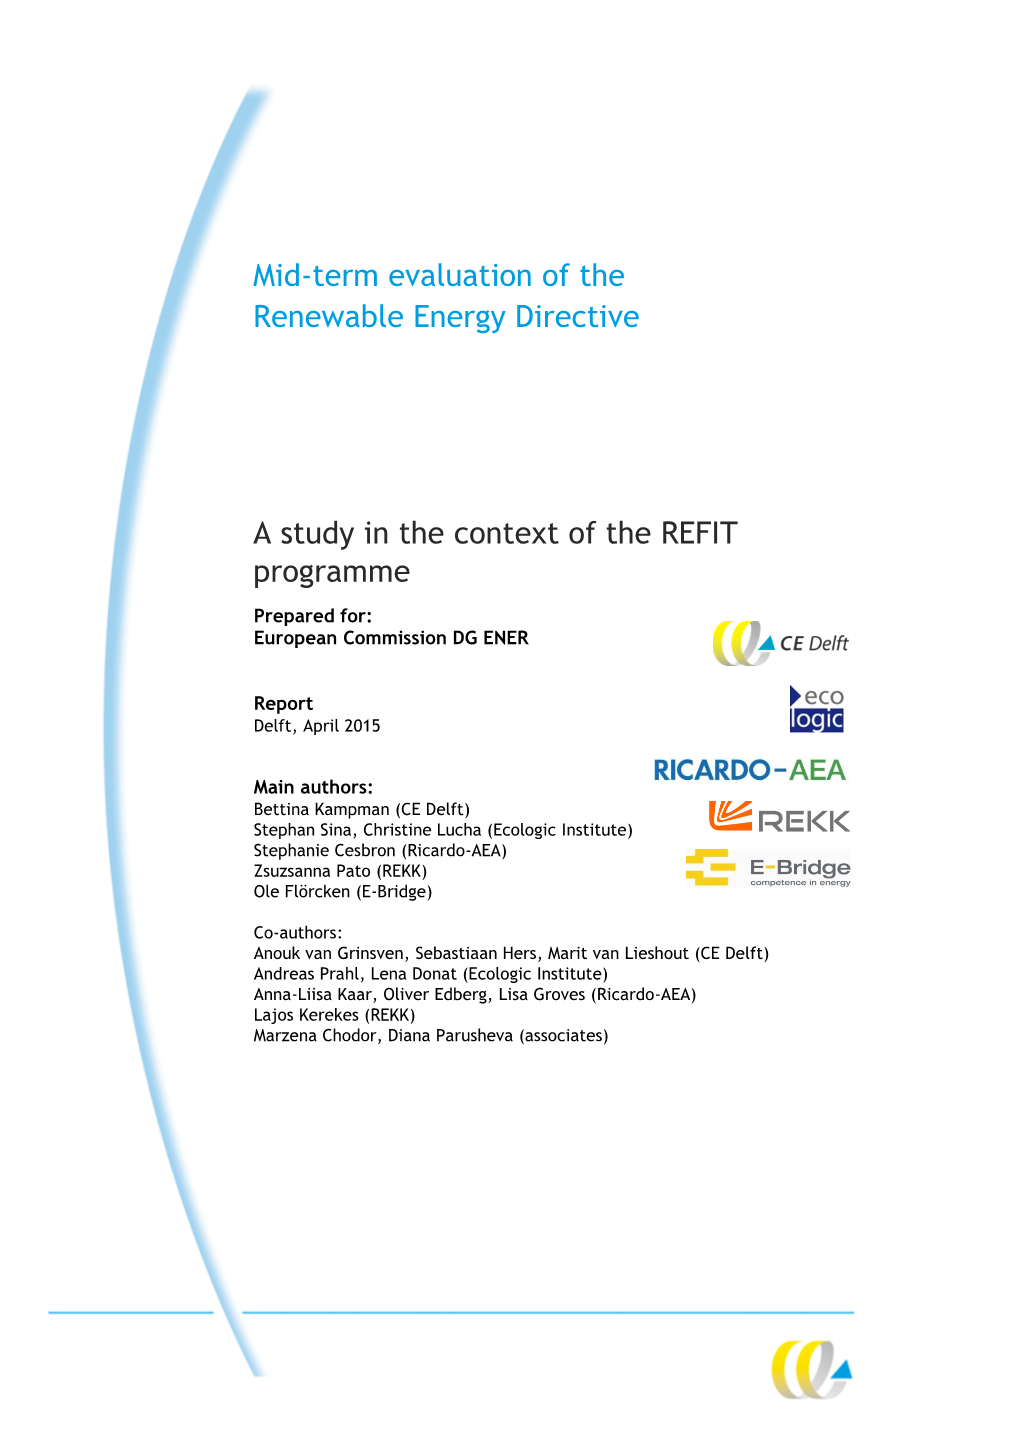 CE Delft Mid-Term Evaluation of the Renewable Energy Directive